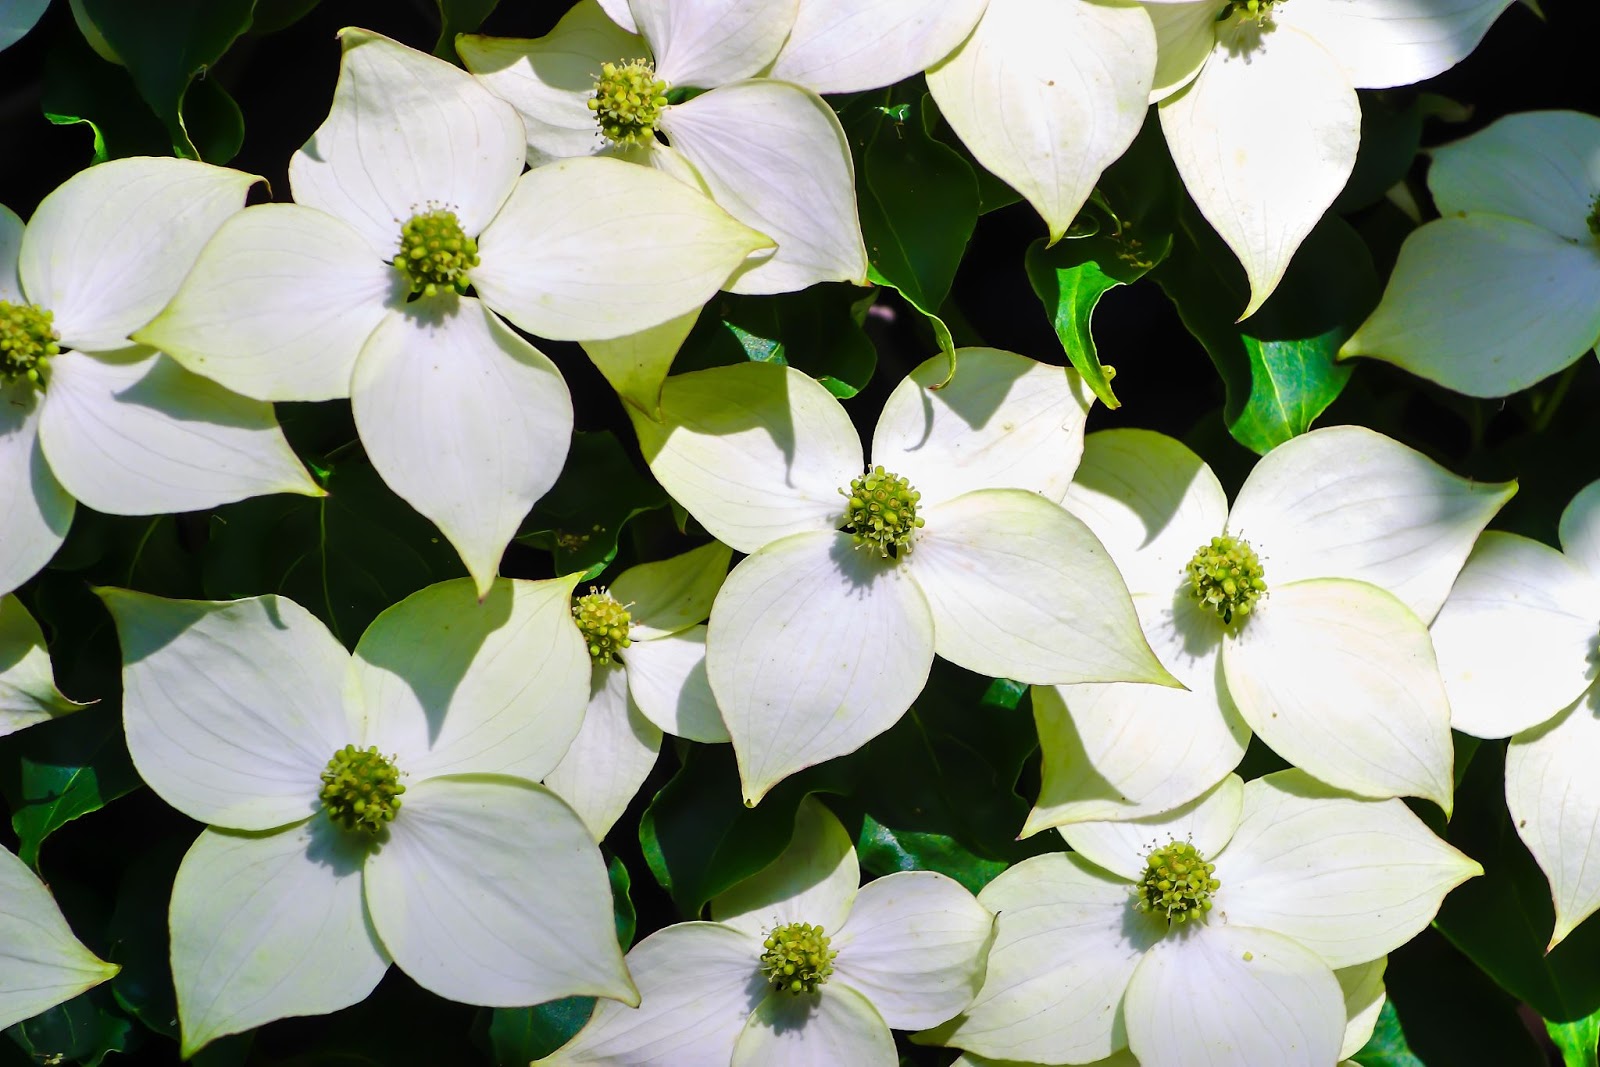 Close up of large, white Kousa dogwood flowers with light green centers and green leaves in the background.